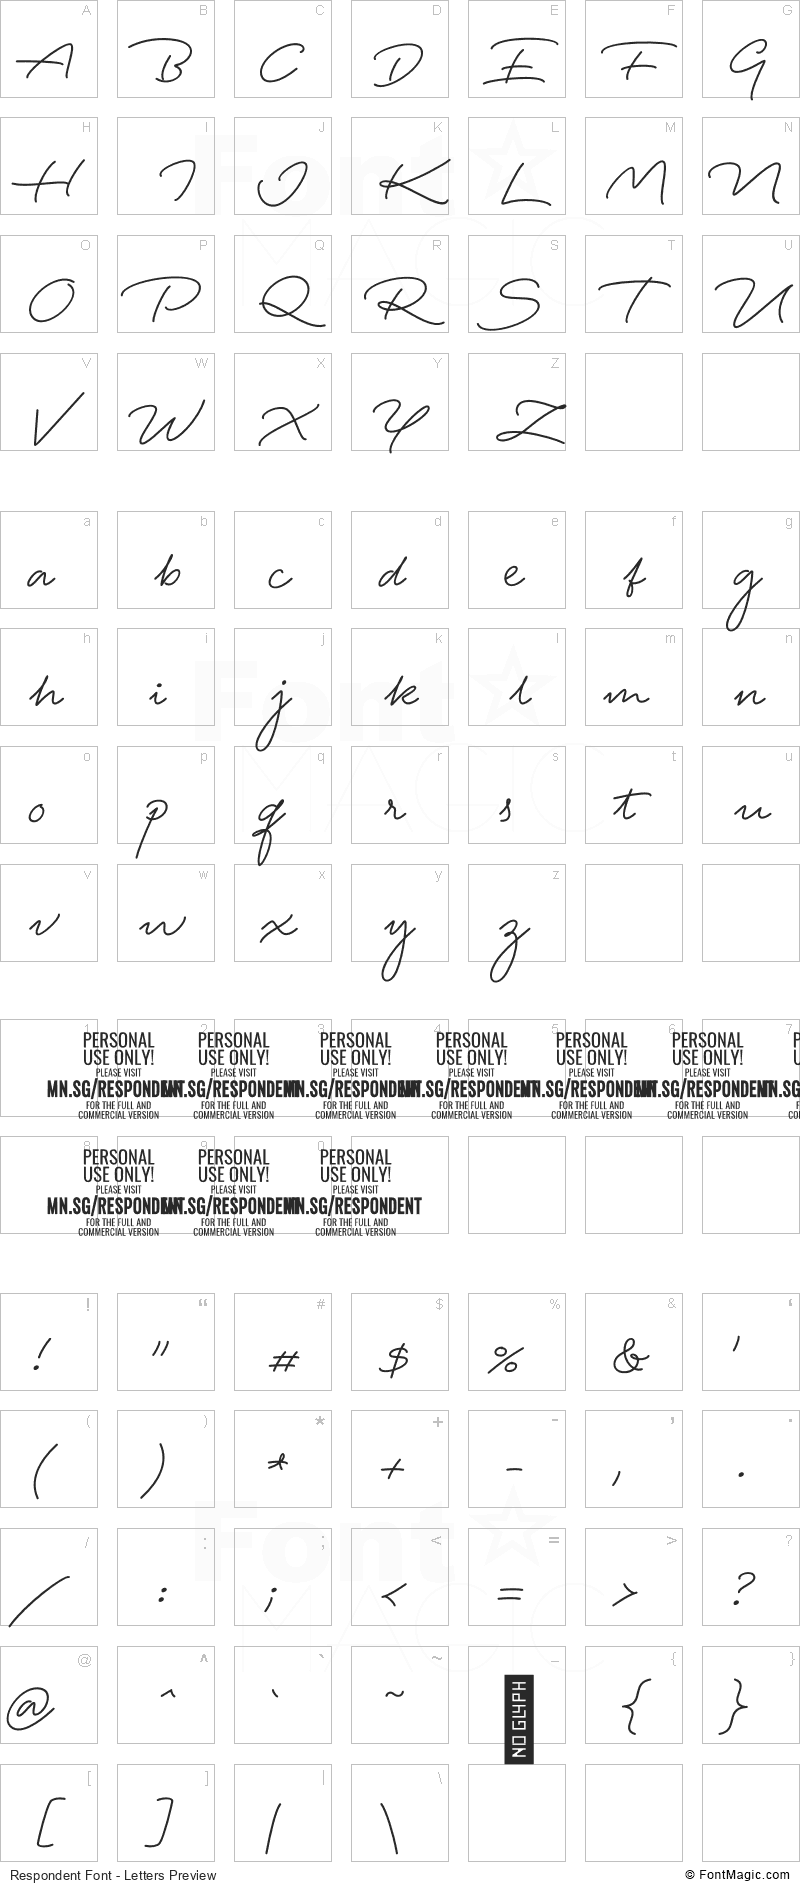 Respondent Font - All Latters Preview Chart